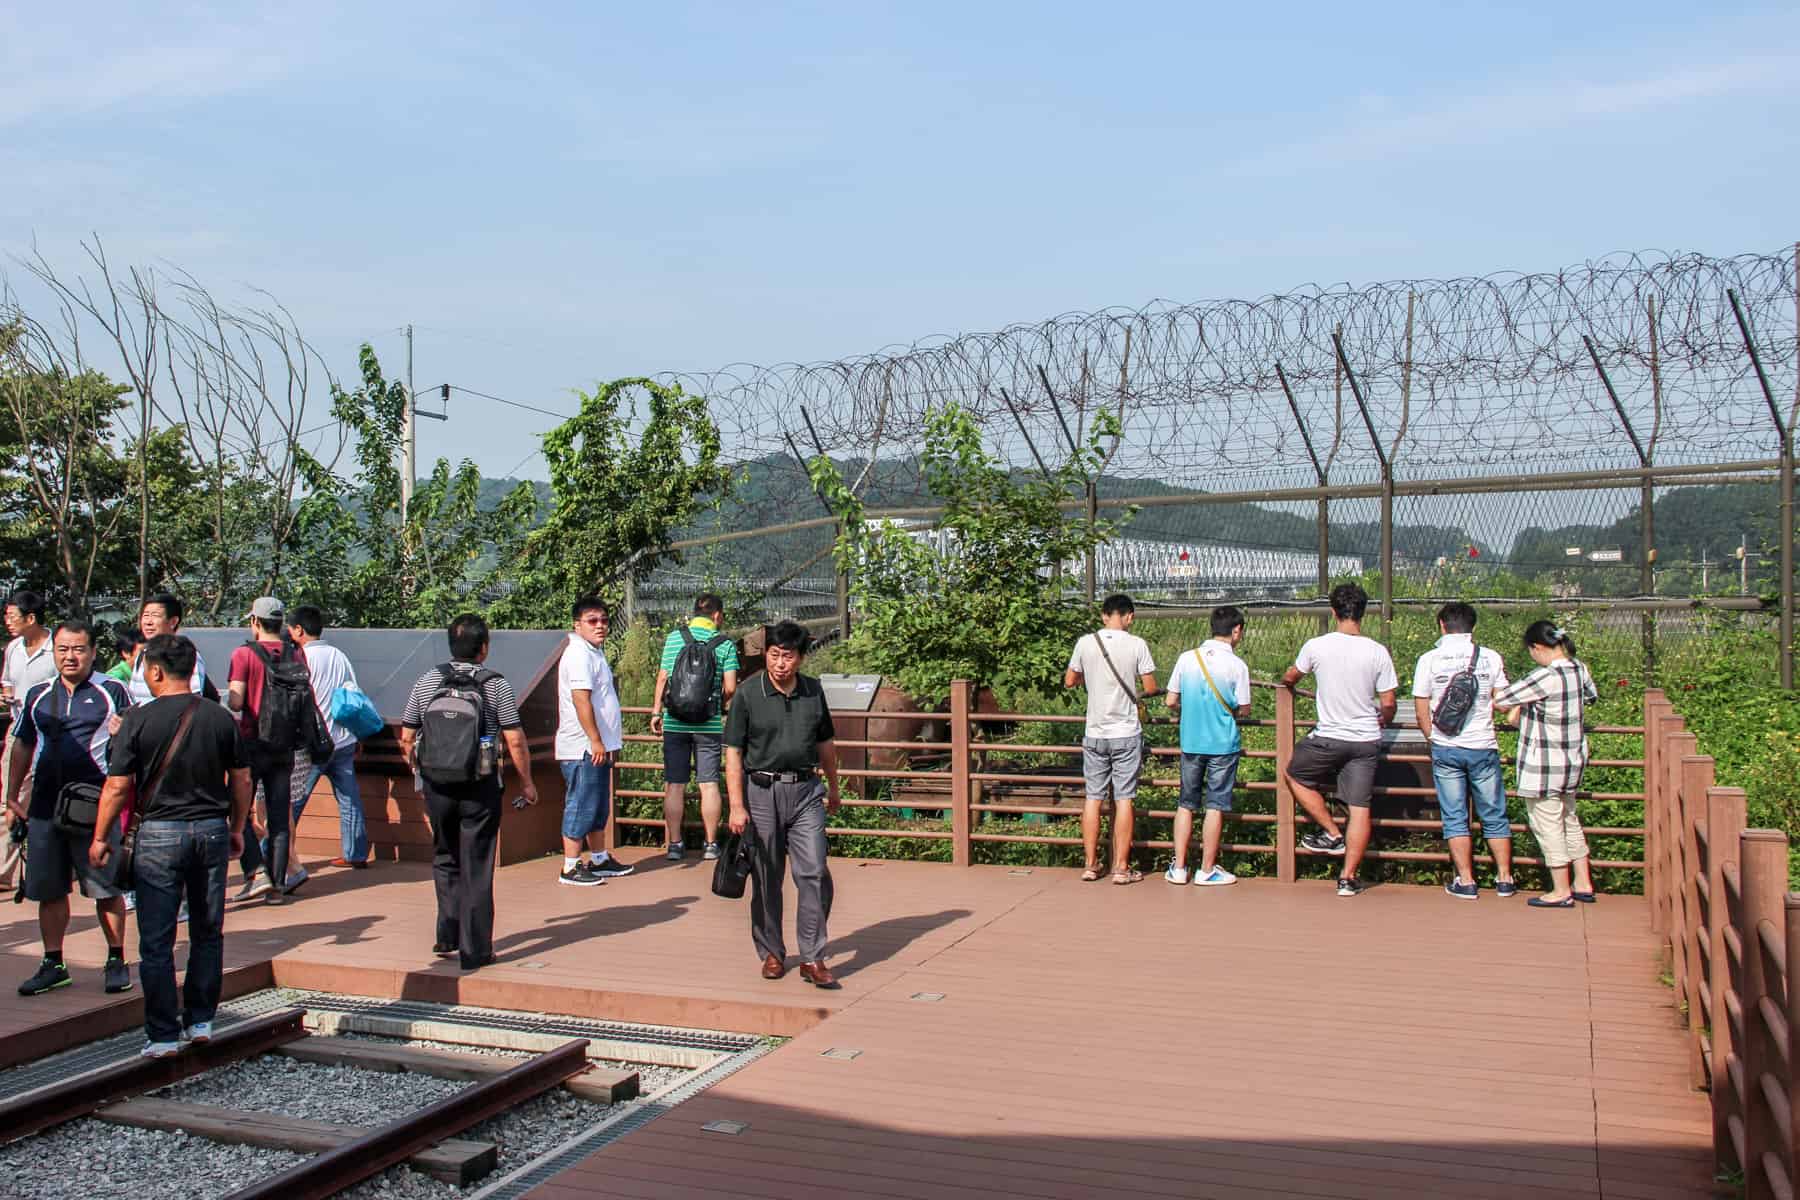 Travellers on a DMZ tour at the site of an unused section of a railway line intended to connect South and North Korea. Beyond the fence and barbed wire is a view to the white Friendship Bridge meant to unite the two countries. 